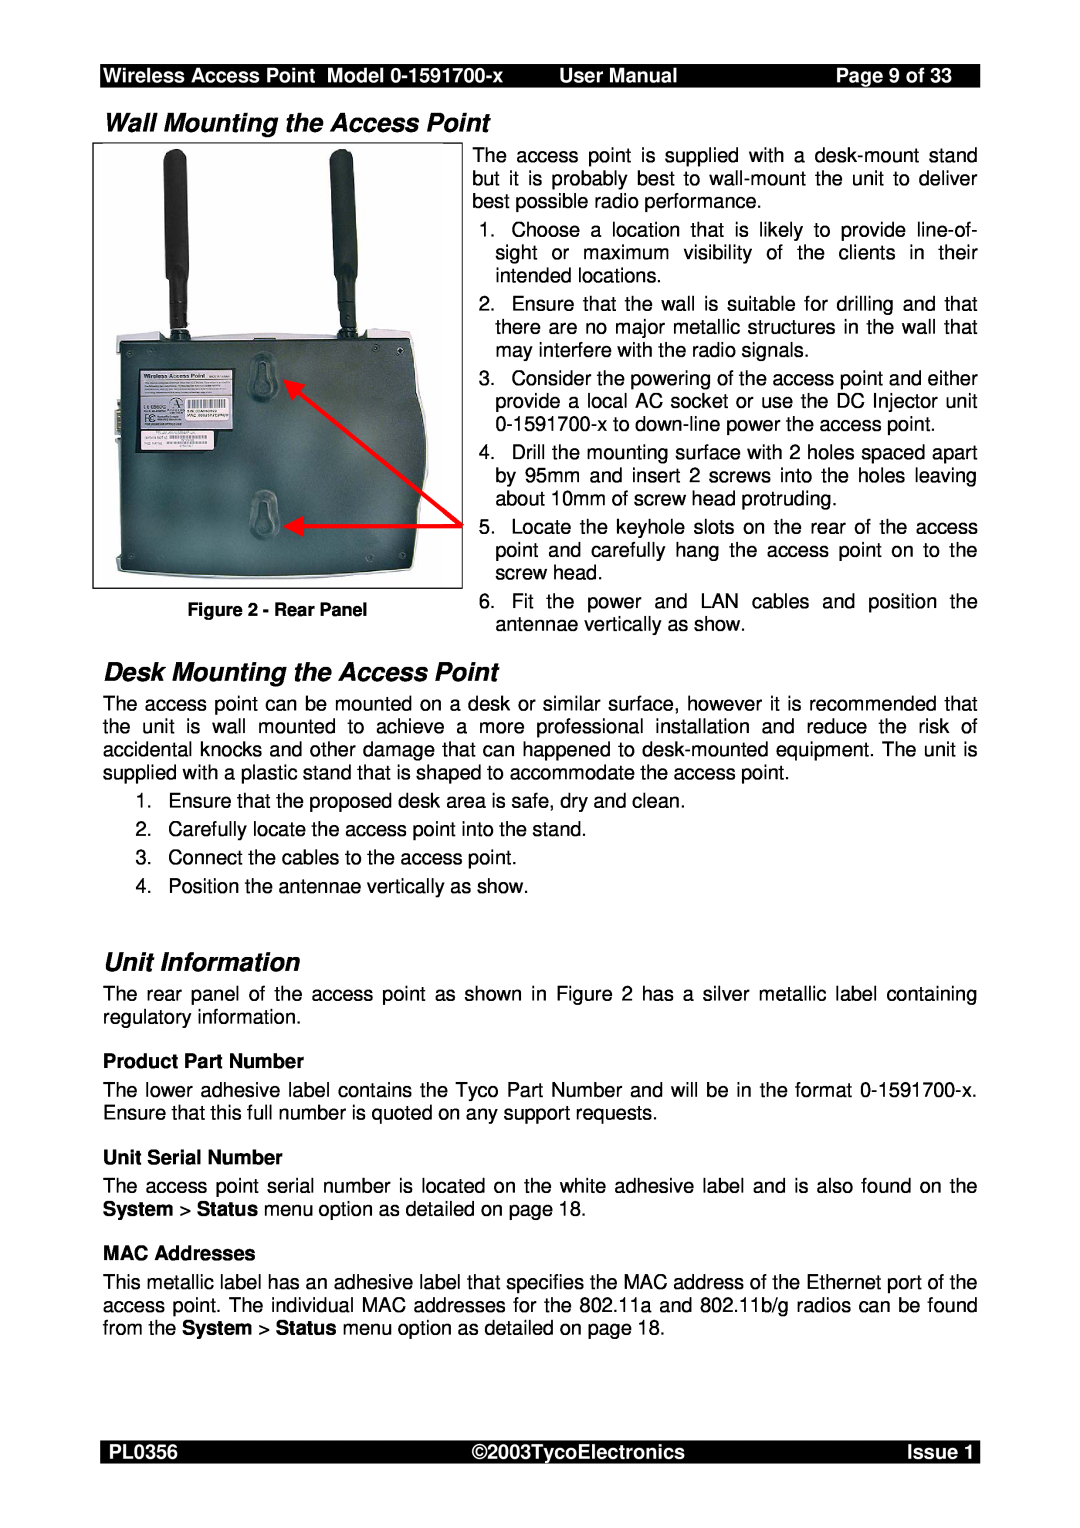 Tyco 0-1591700-x Wall Mounting the Access Point, Desk Mounting the Access Point, Unit Information, Page 9 of, User Manual 